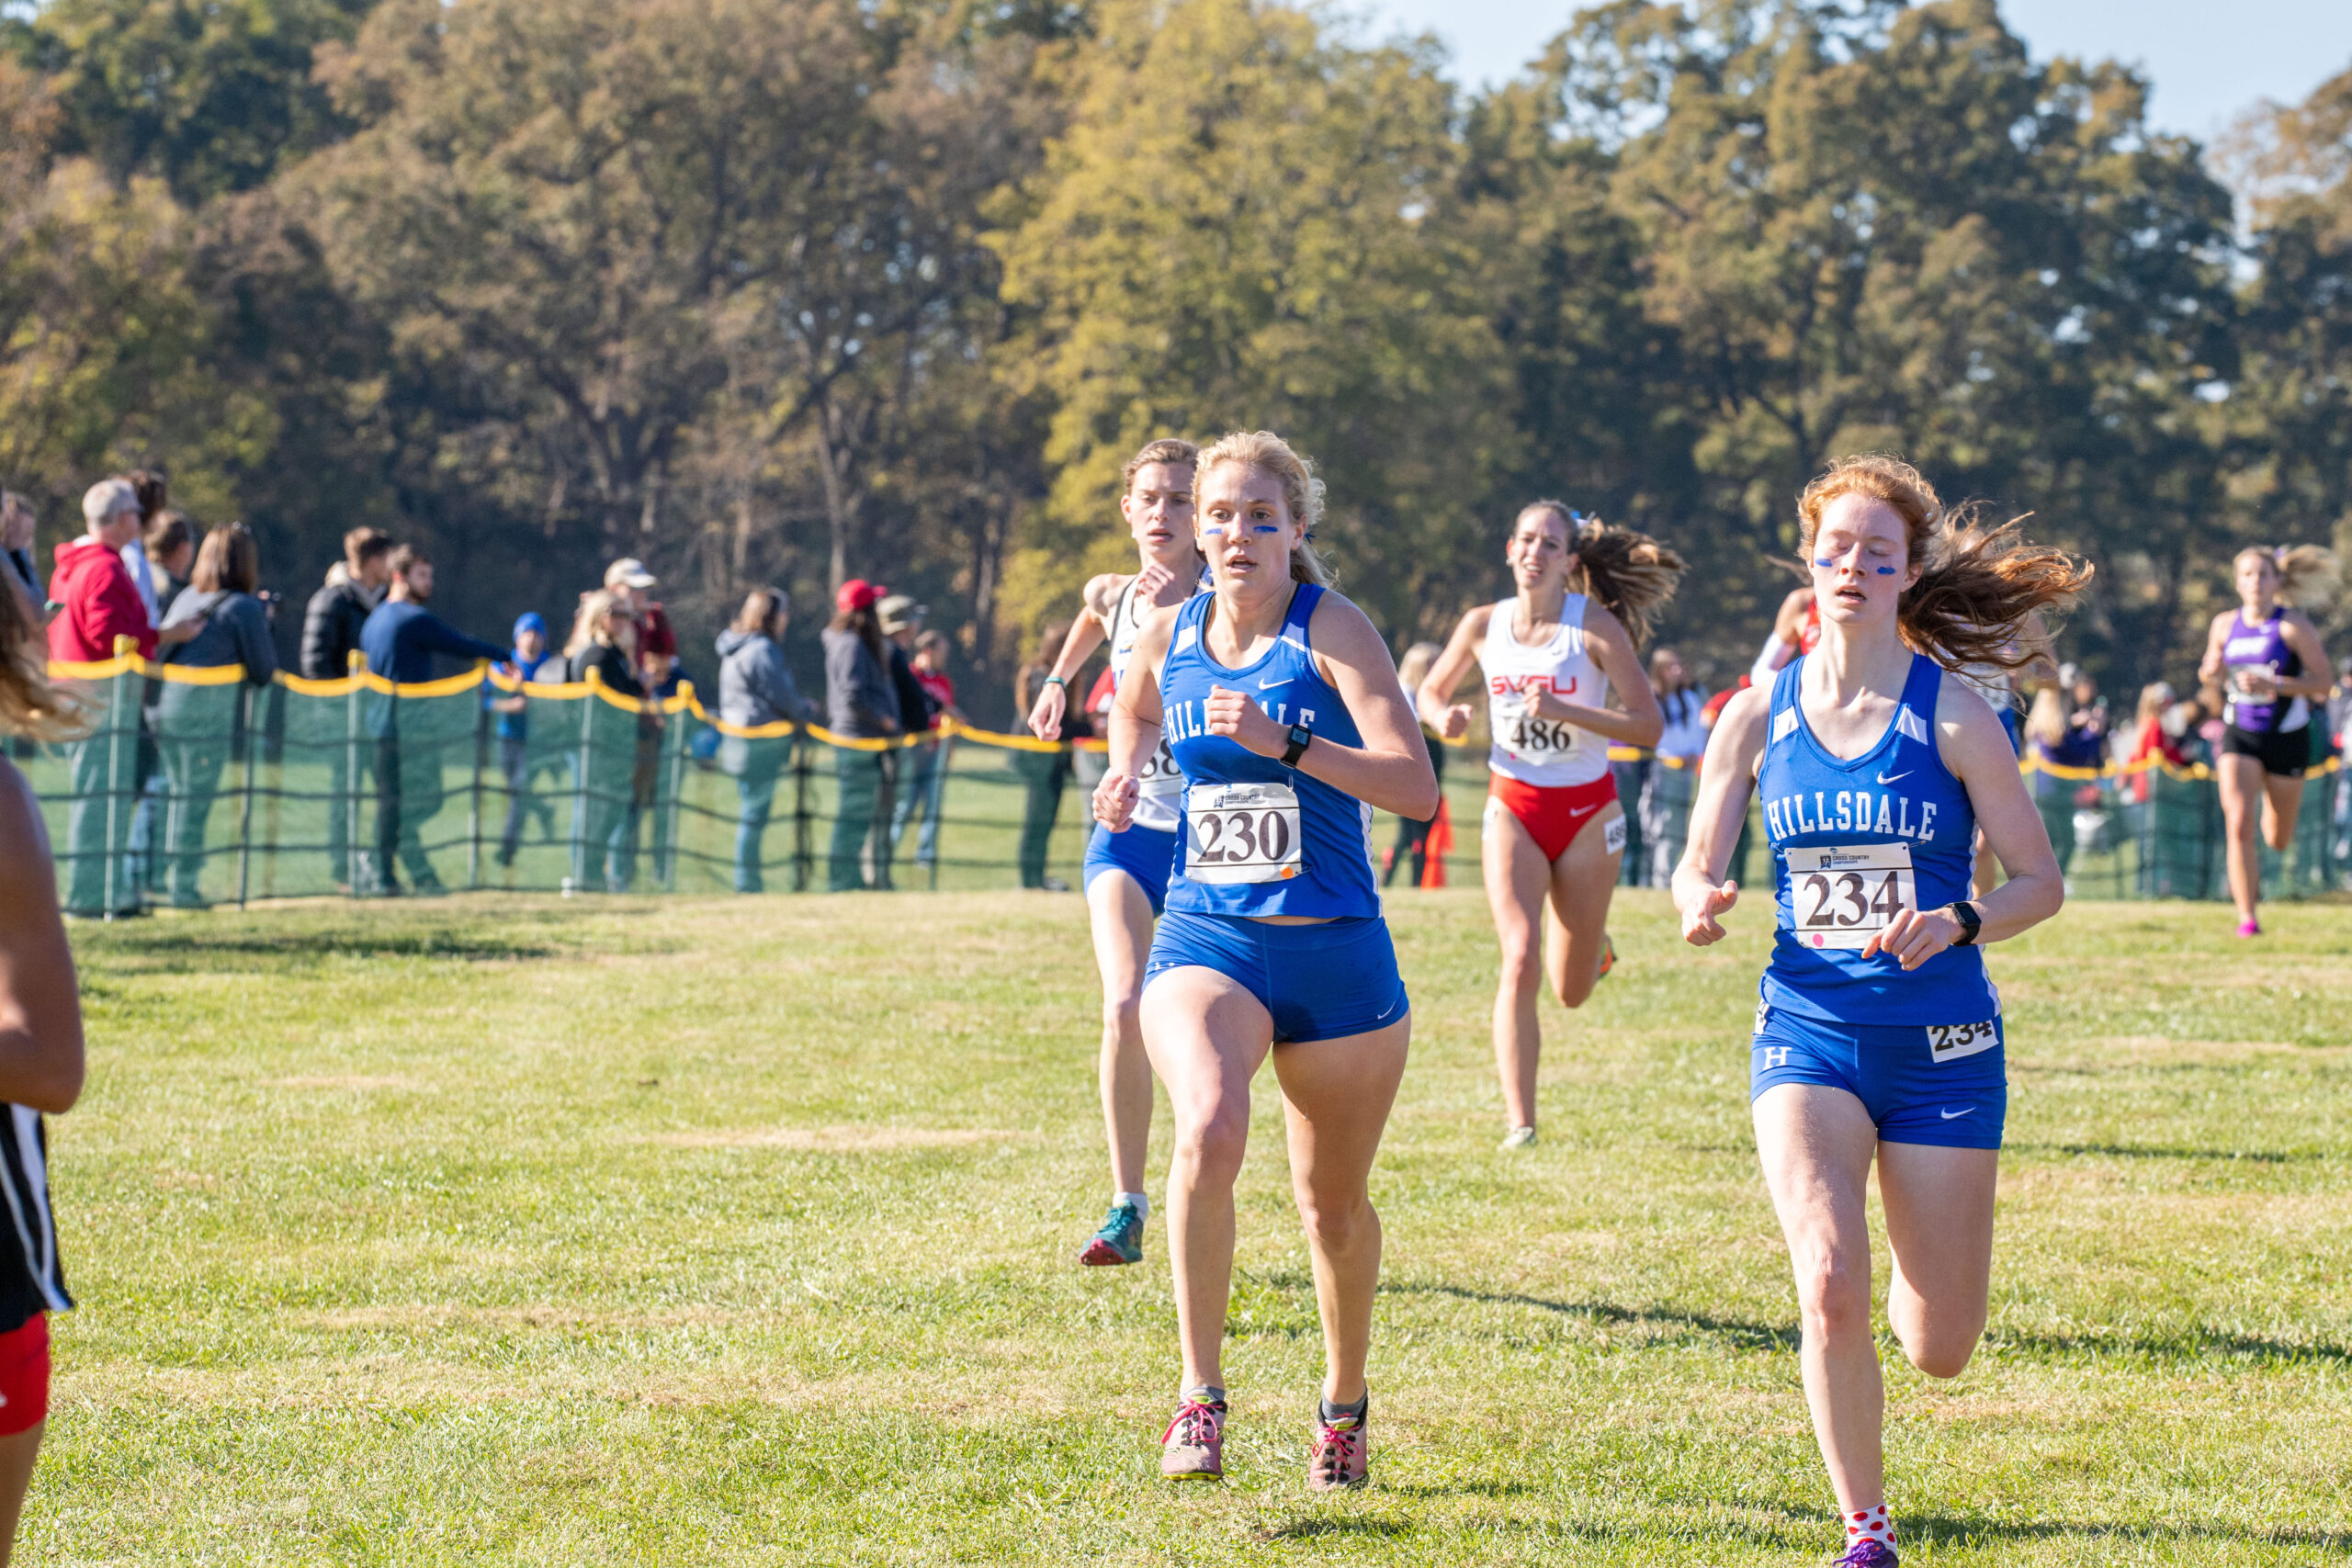 Women’s XC finishes 7th in the region, advances to Nationals